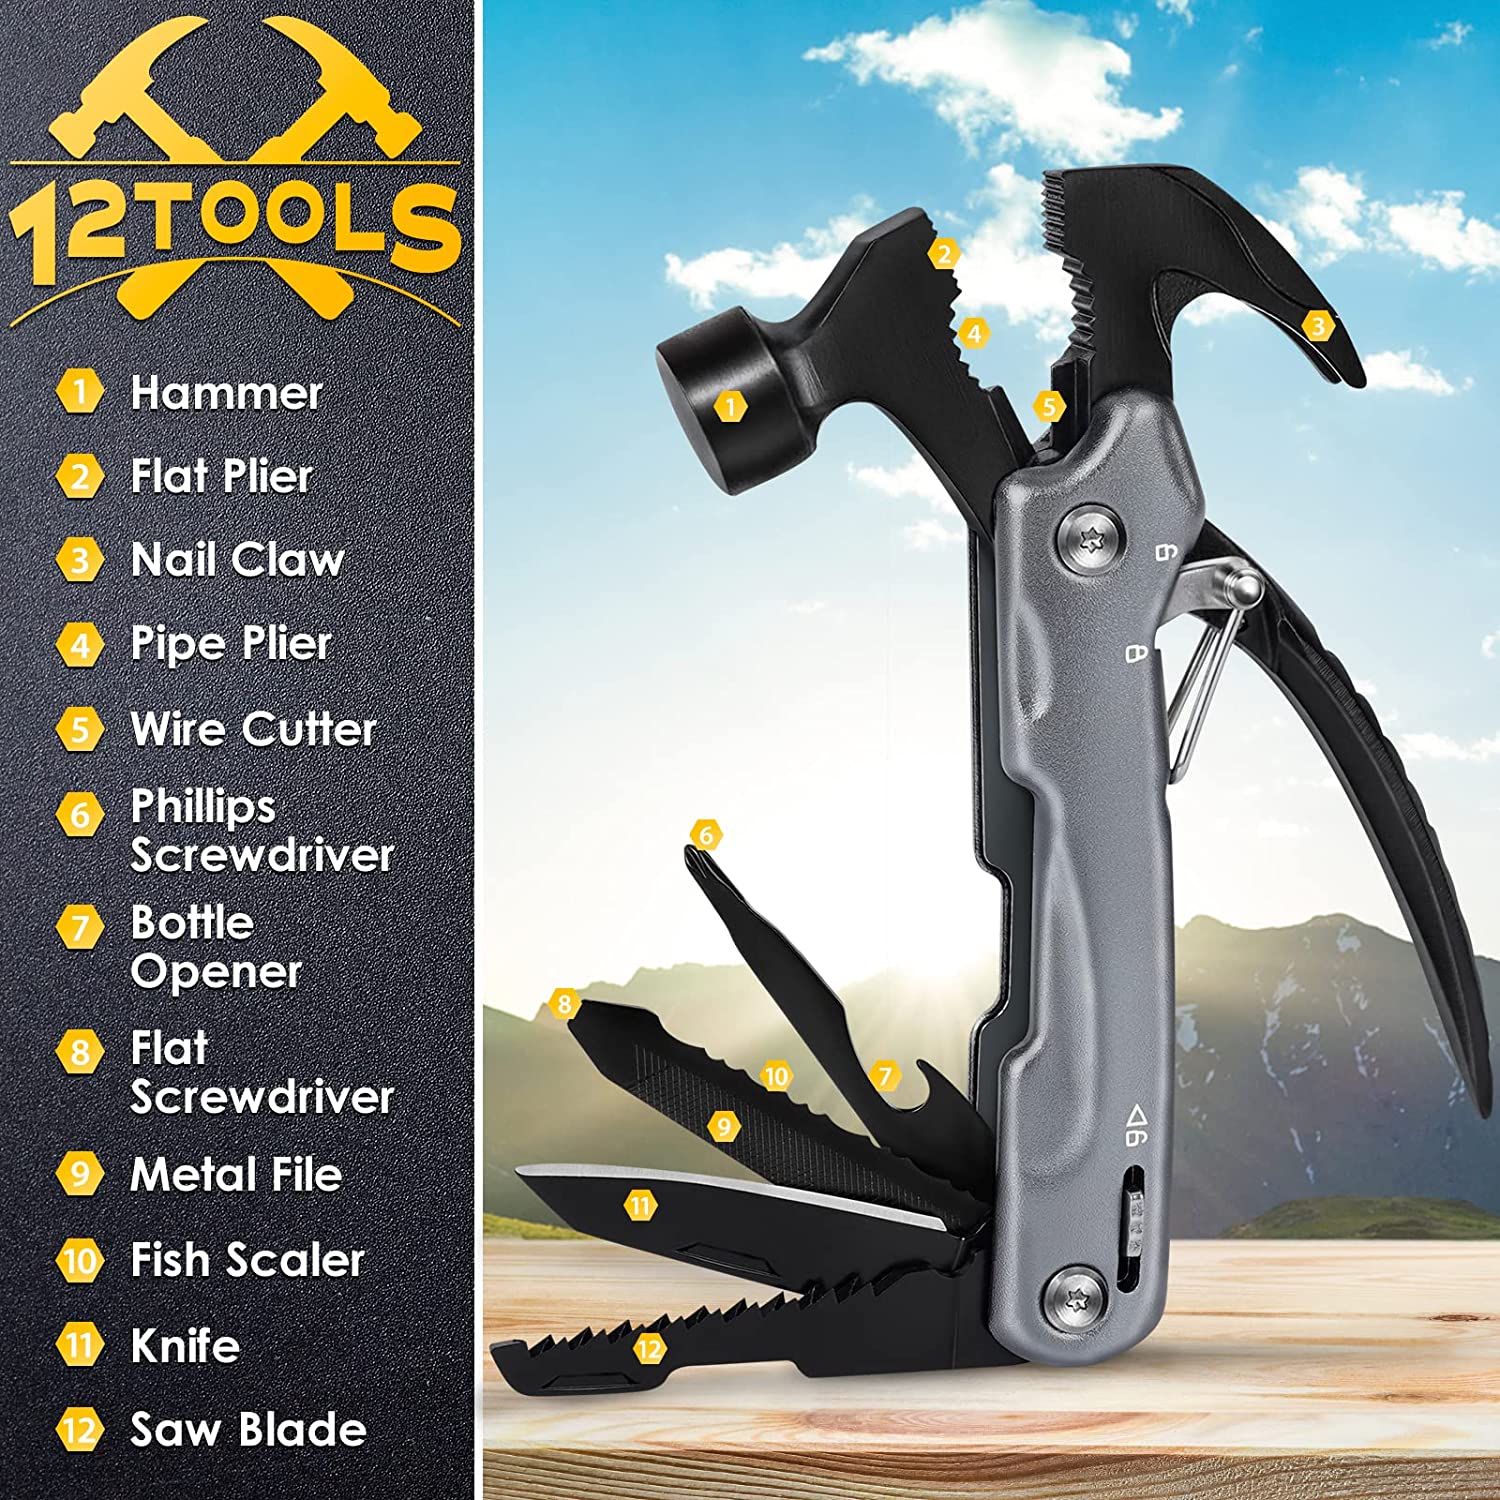 Camping Accessories Multitool Gifts for Men – 12 in 1 Christmas Stocking Stuffers Hammer Multi Tool Birthday Gift for Dad Boyfriend Women Husband Cool Stuff Gadgets Pocket Tools for Fishing Hunting